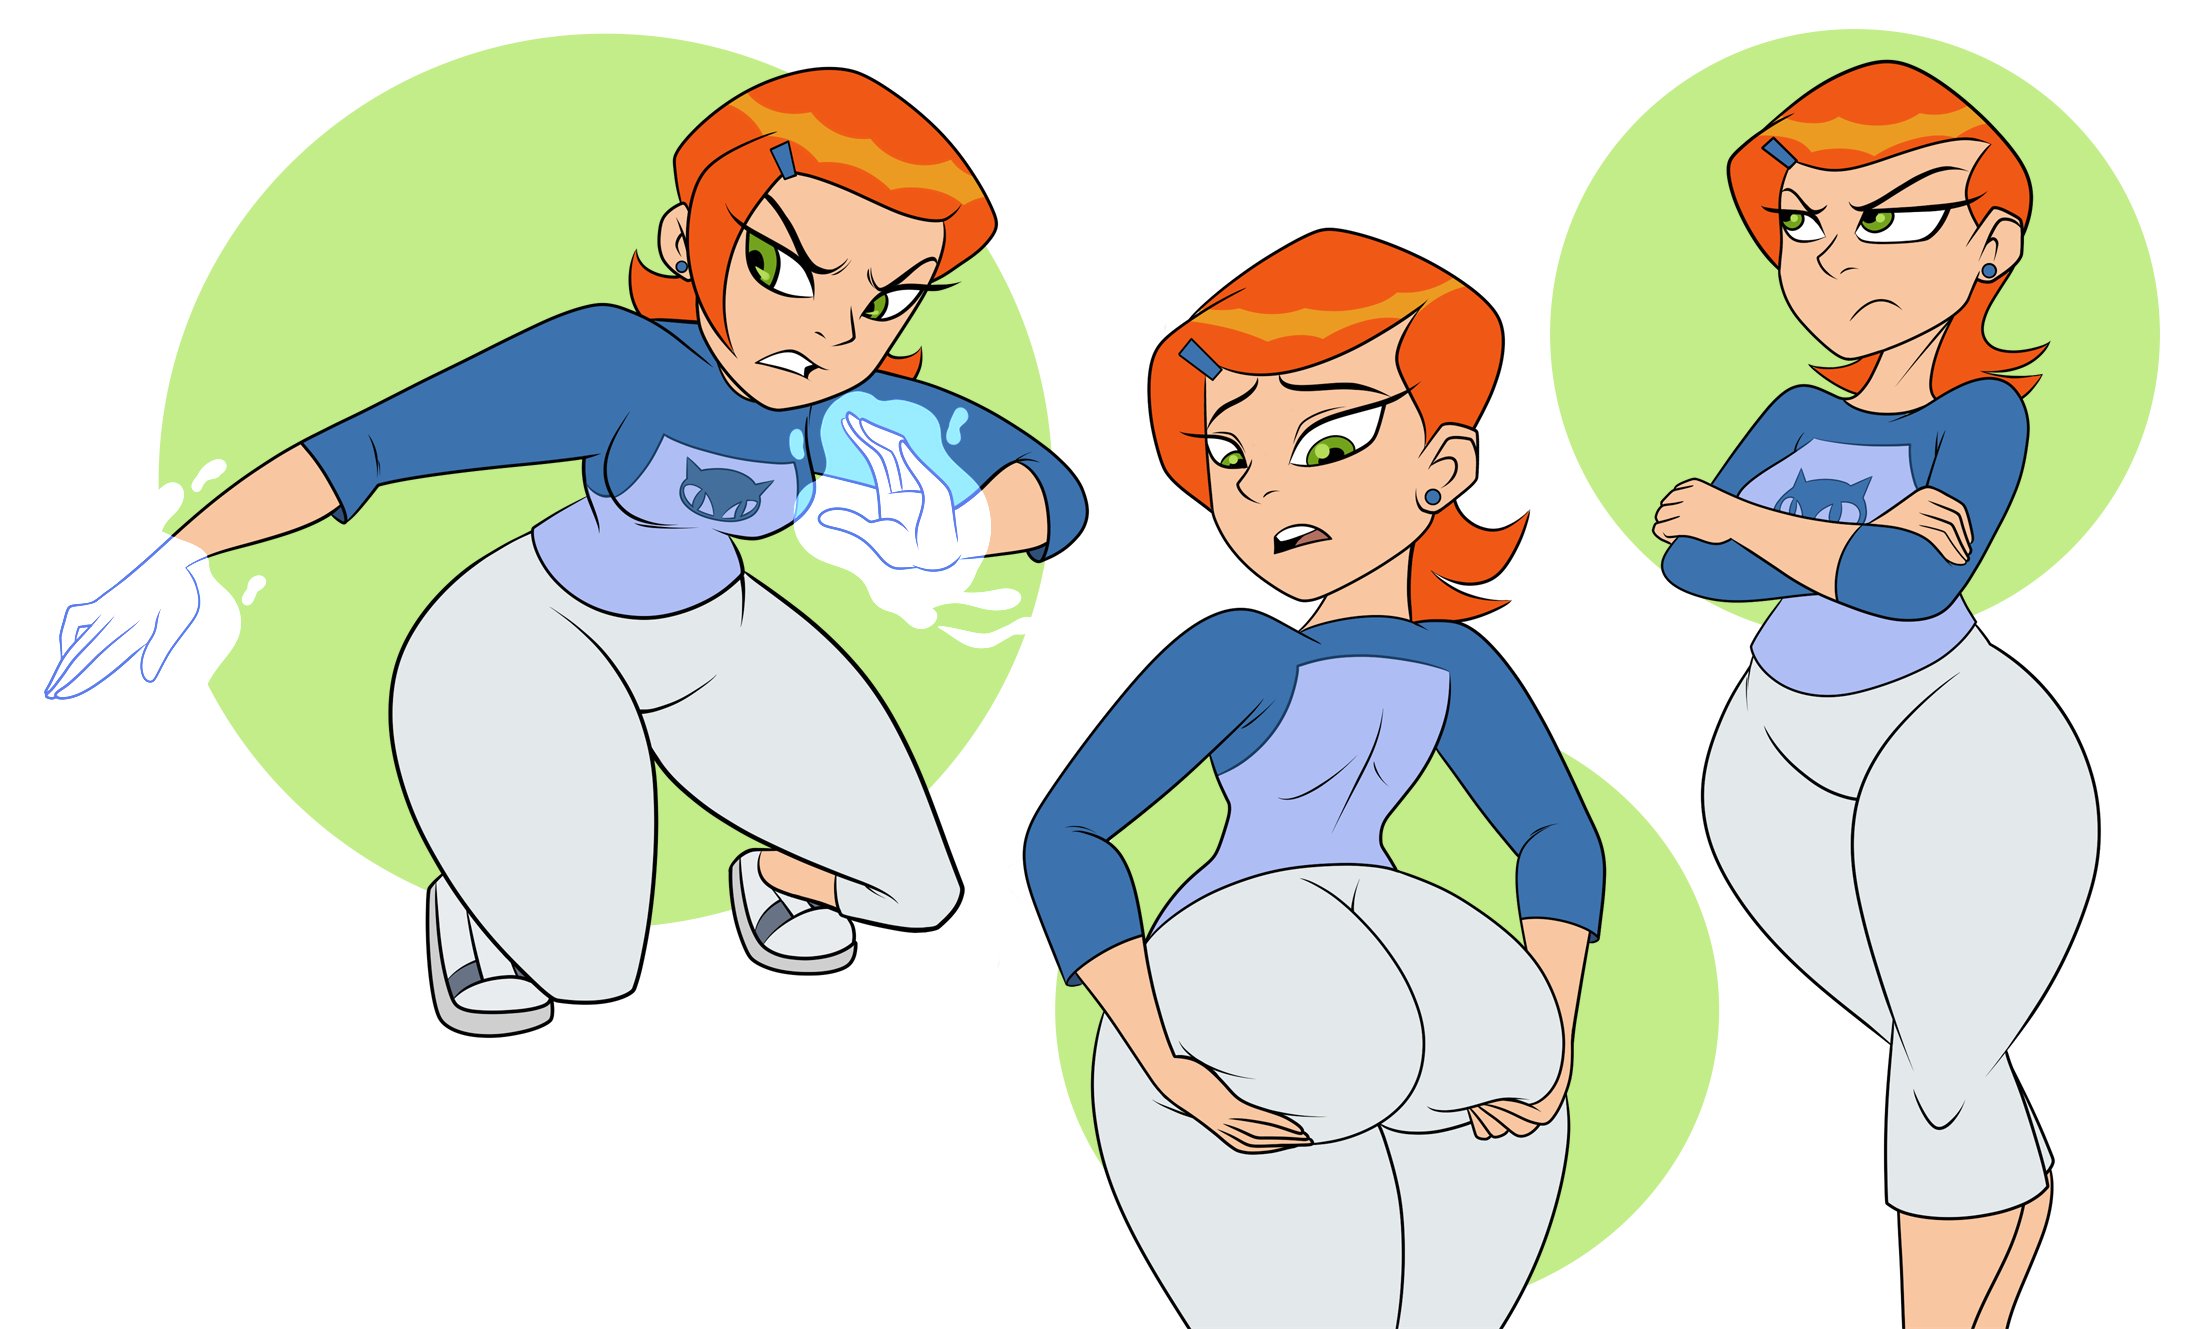 33. Finished the Gwen studies. 